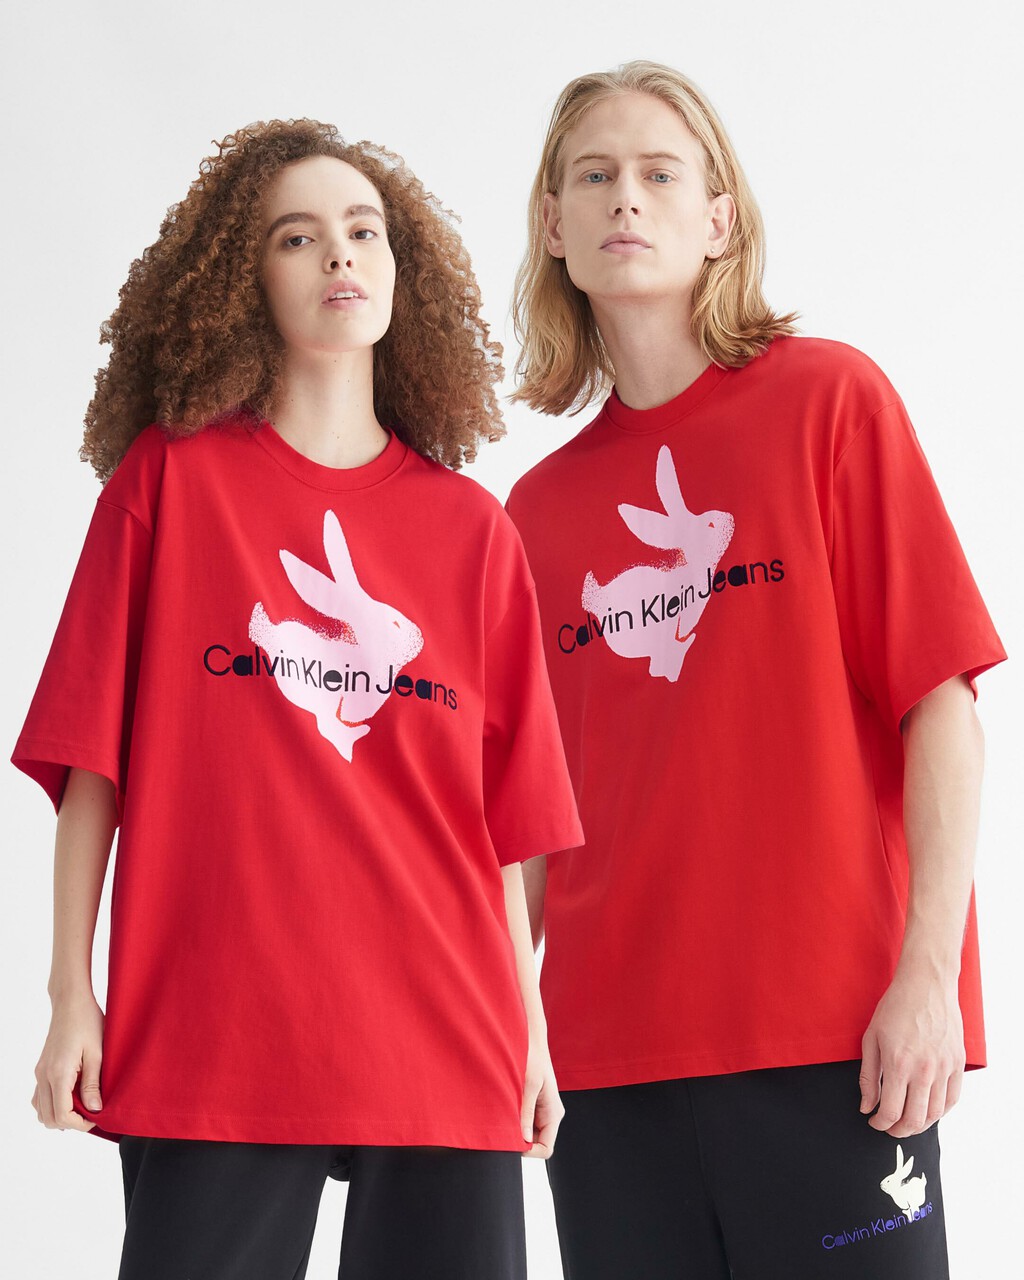 Year Of The Rabbit Relaxed Fit Tee, FLAME SCARLET, hi-res